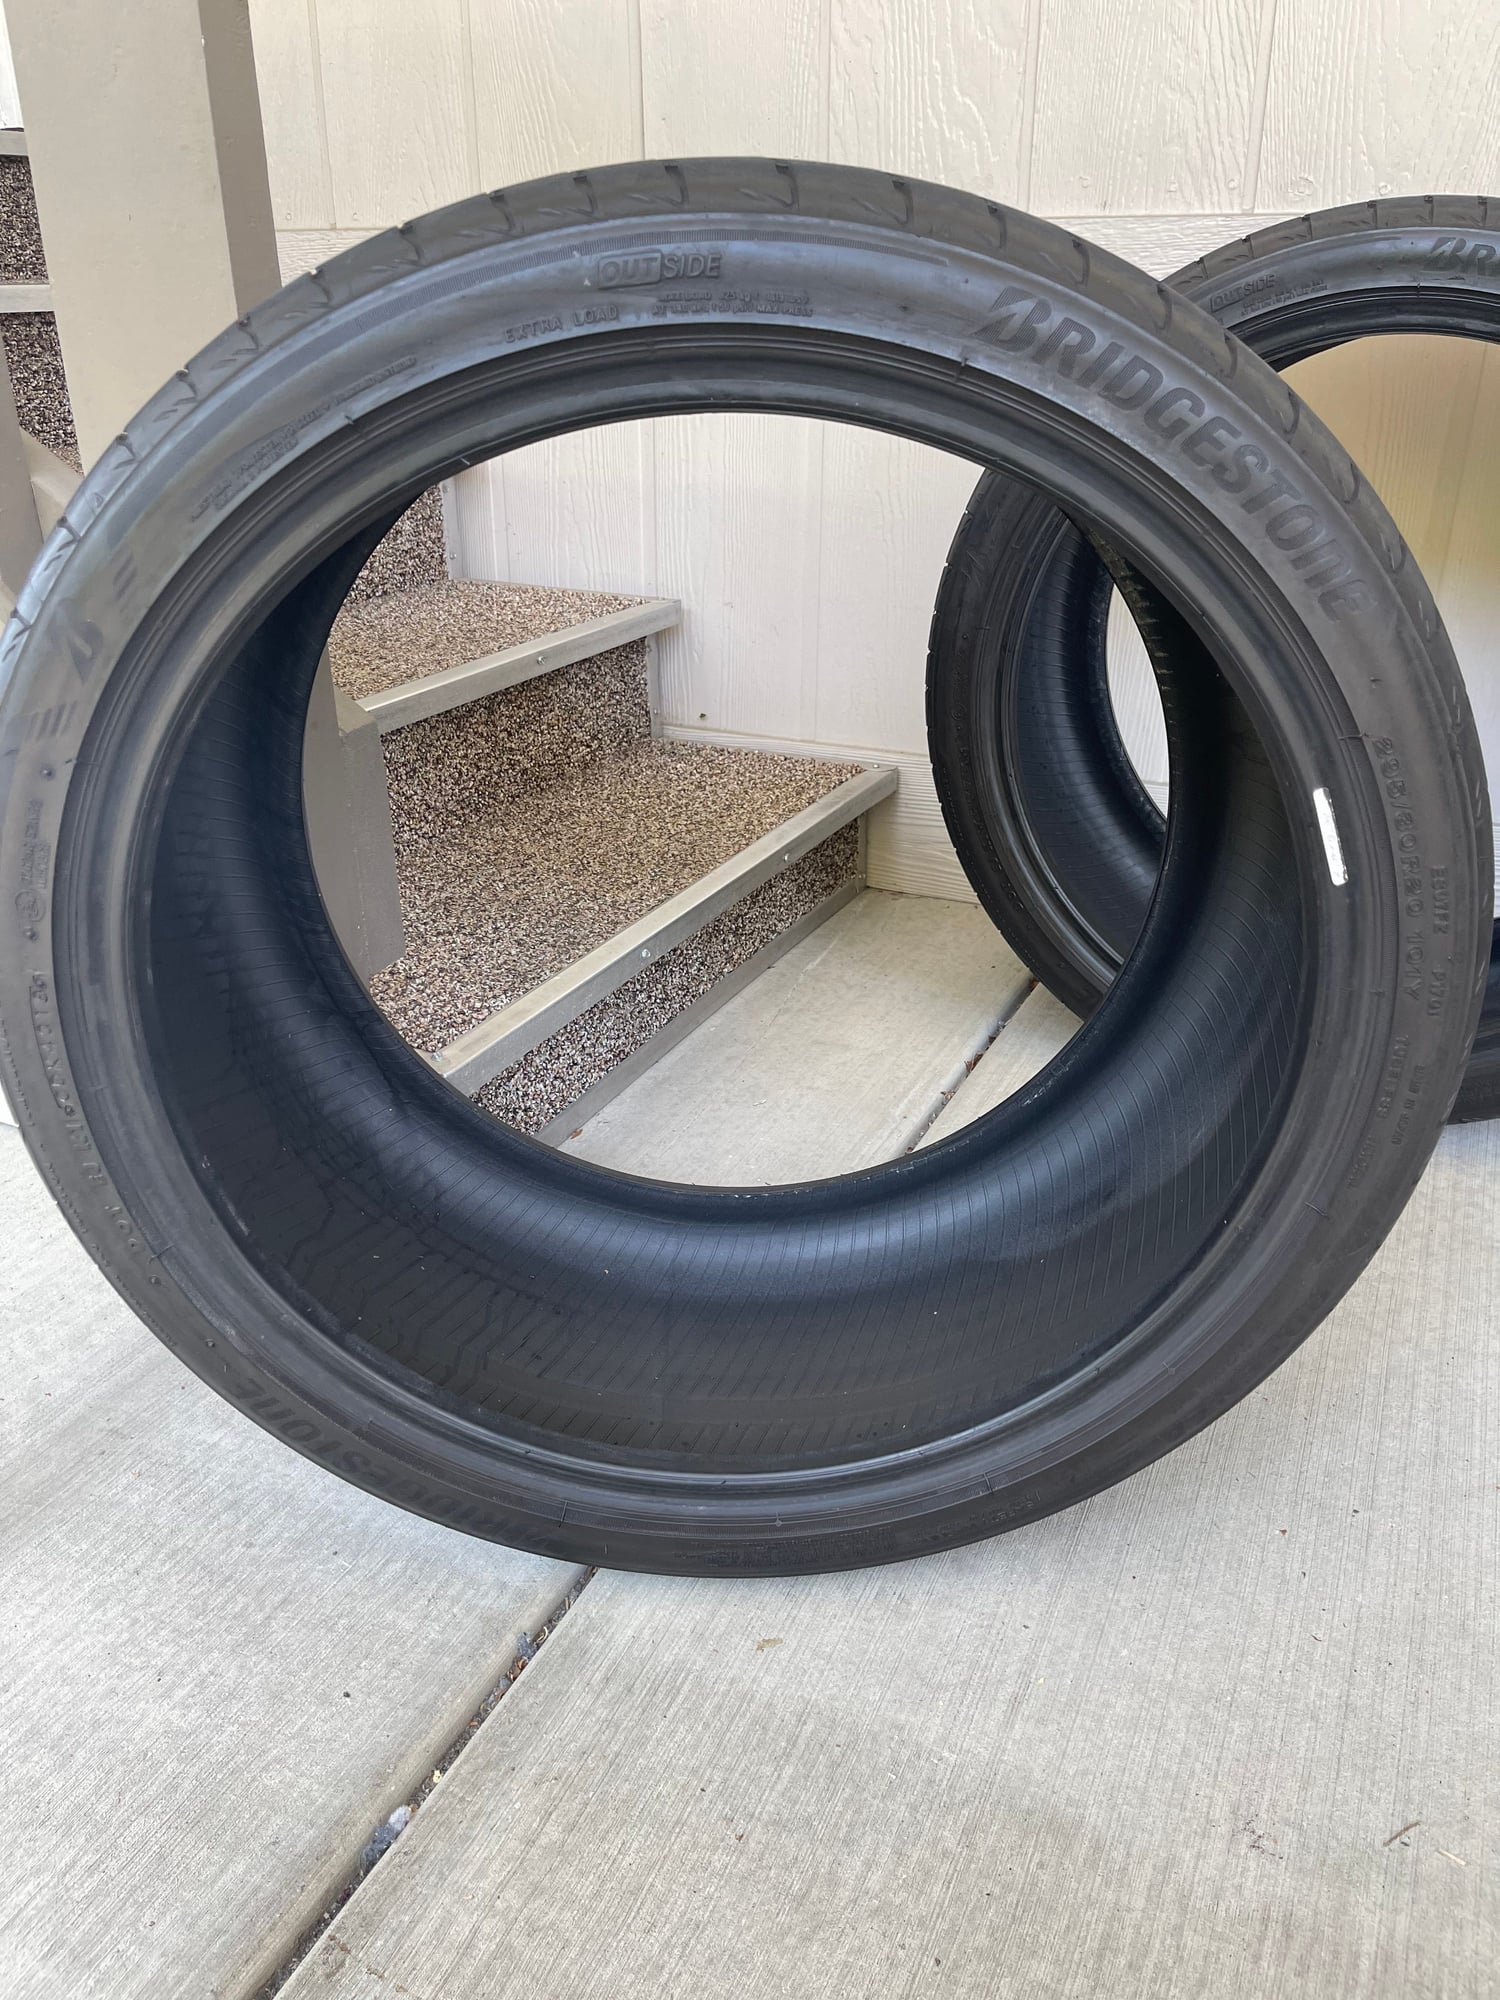 Wheels and Tires/Axles - 295/30/20 & 265/35/30 used tires - Used - 2018 to 2021 Mercedes-Benz E63 AMG S - Irvine, CA 92612, United States